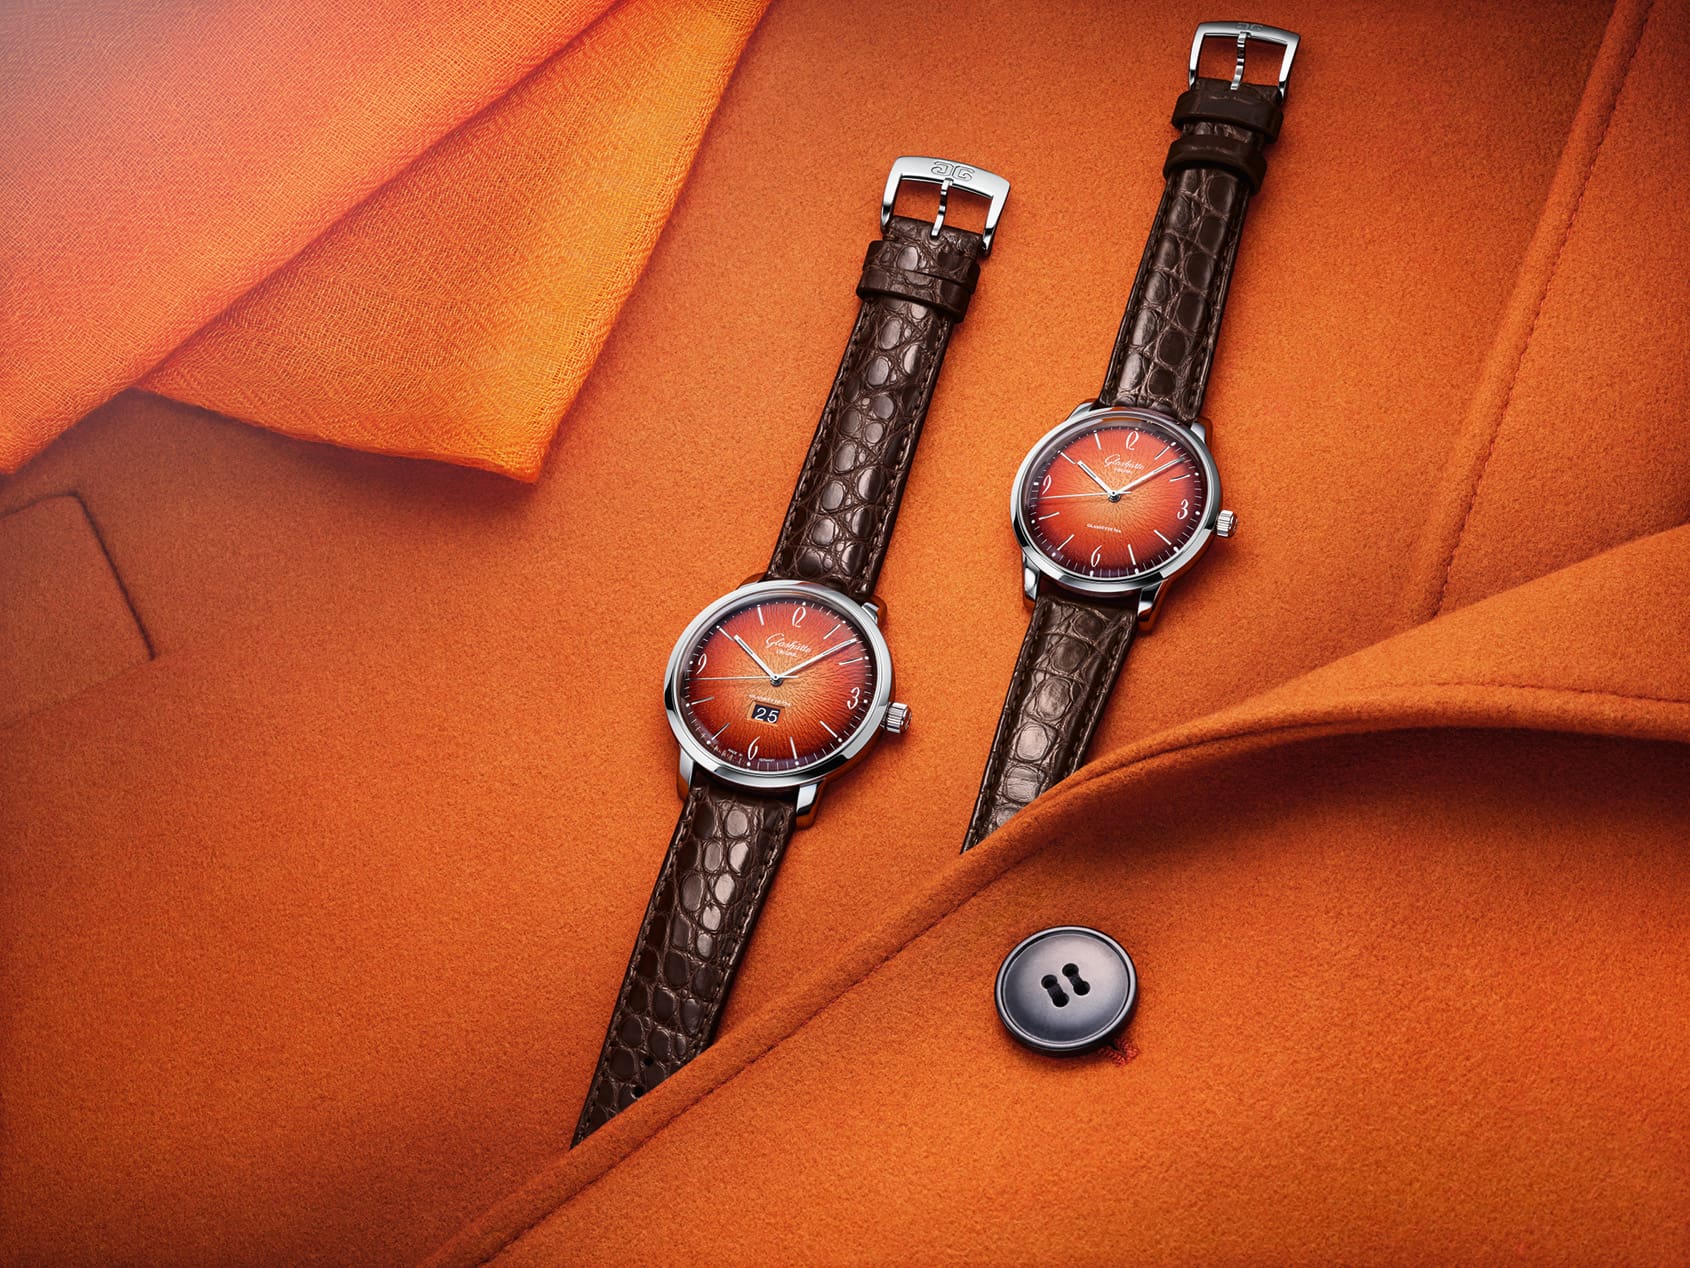 INTRODUCING: Glashütte Original gets spicy with two new pumpkin-hued Sixties models 